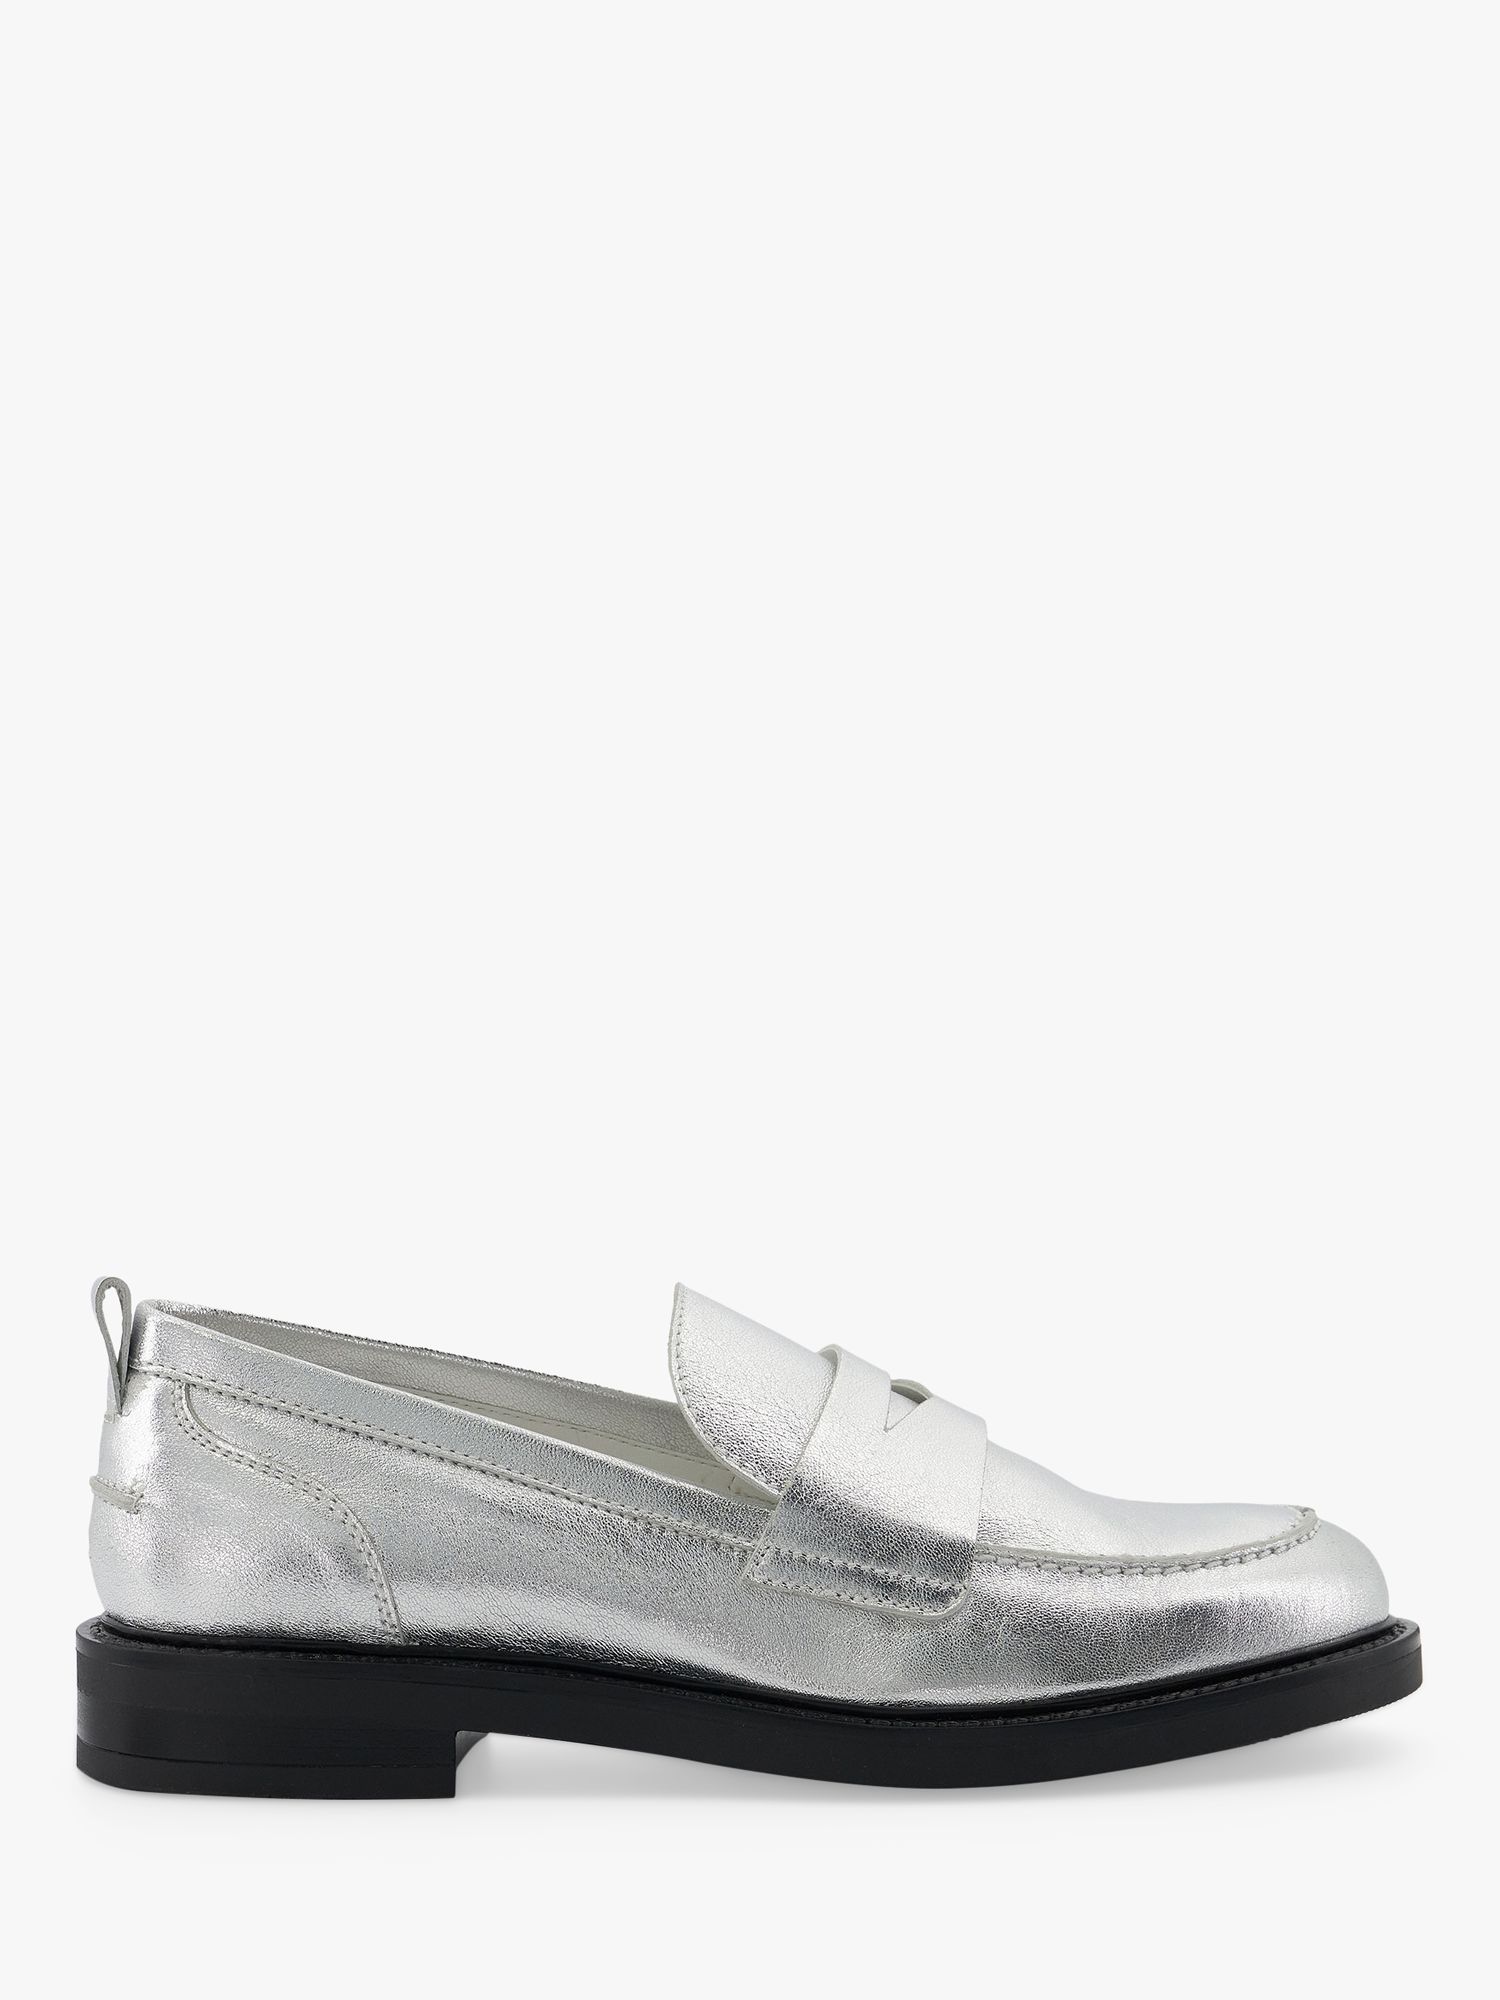 Dune Geeno Leather Loafers, Silver at John Lewis & Partners